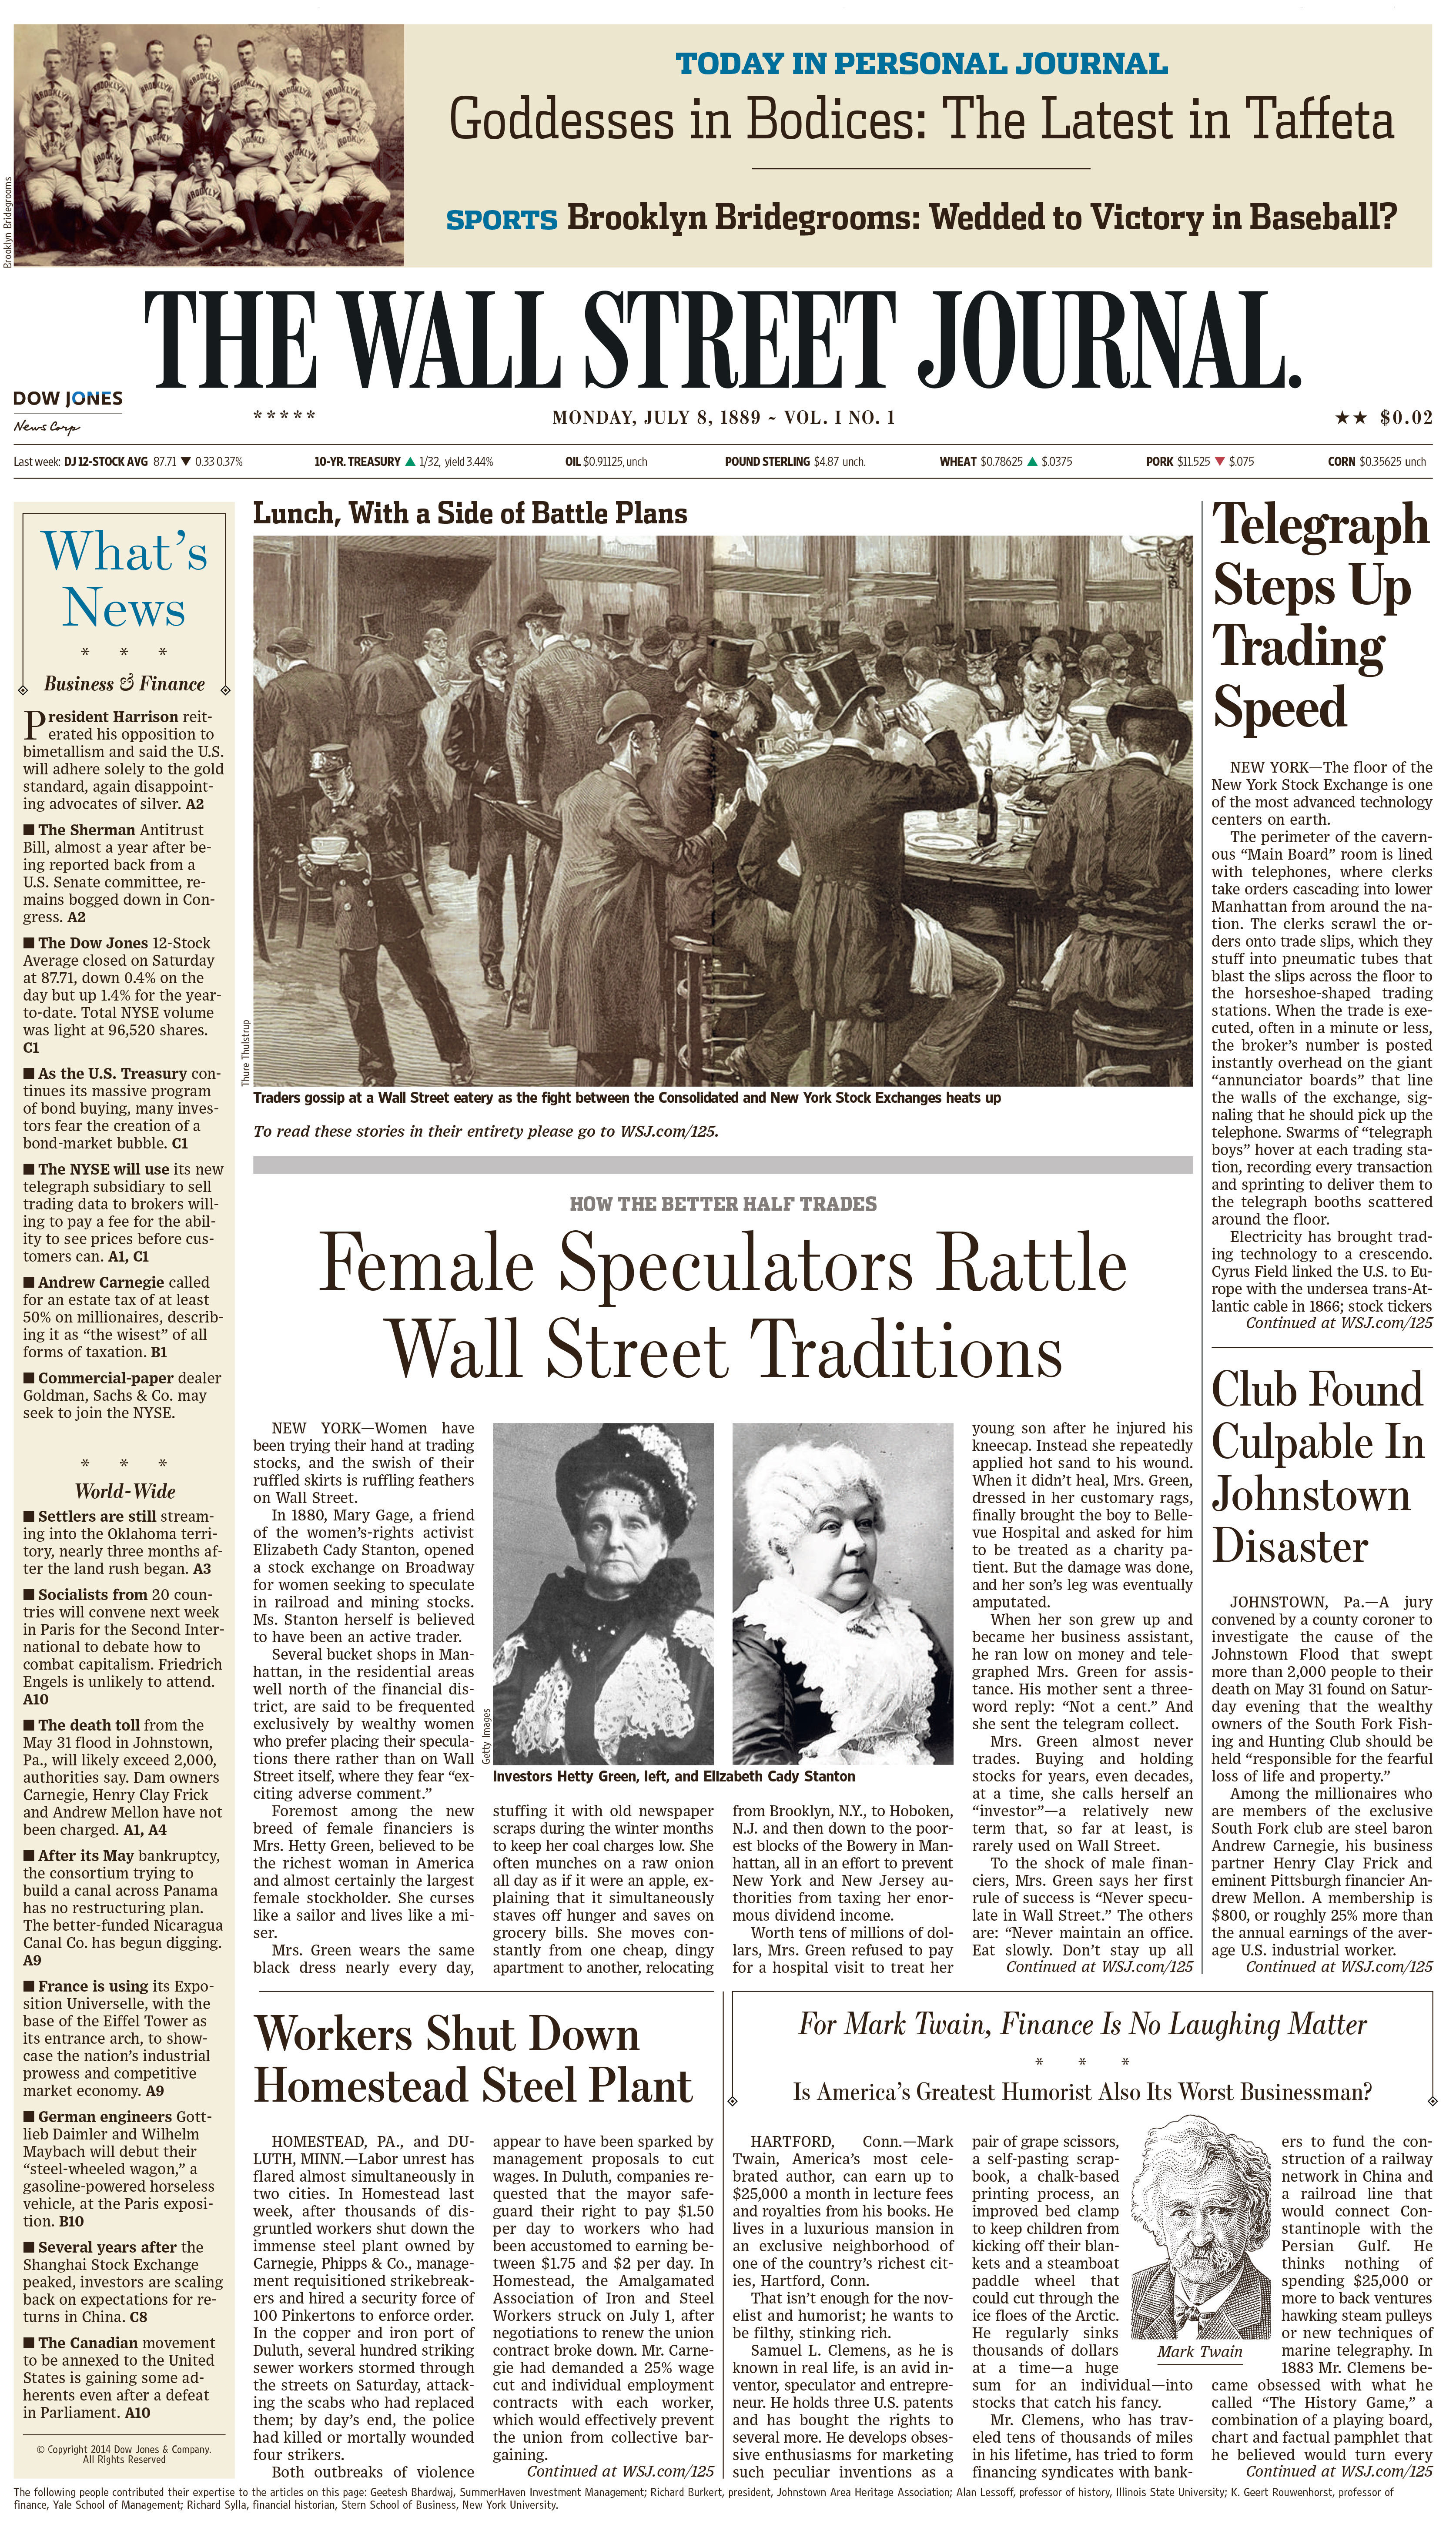 wall-street-journal-celebrates-125th-anniversary-by-reprinting-original-front-page-huffpost